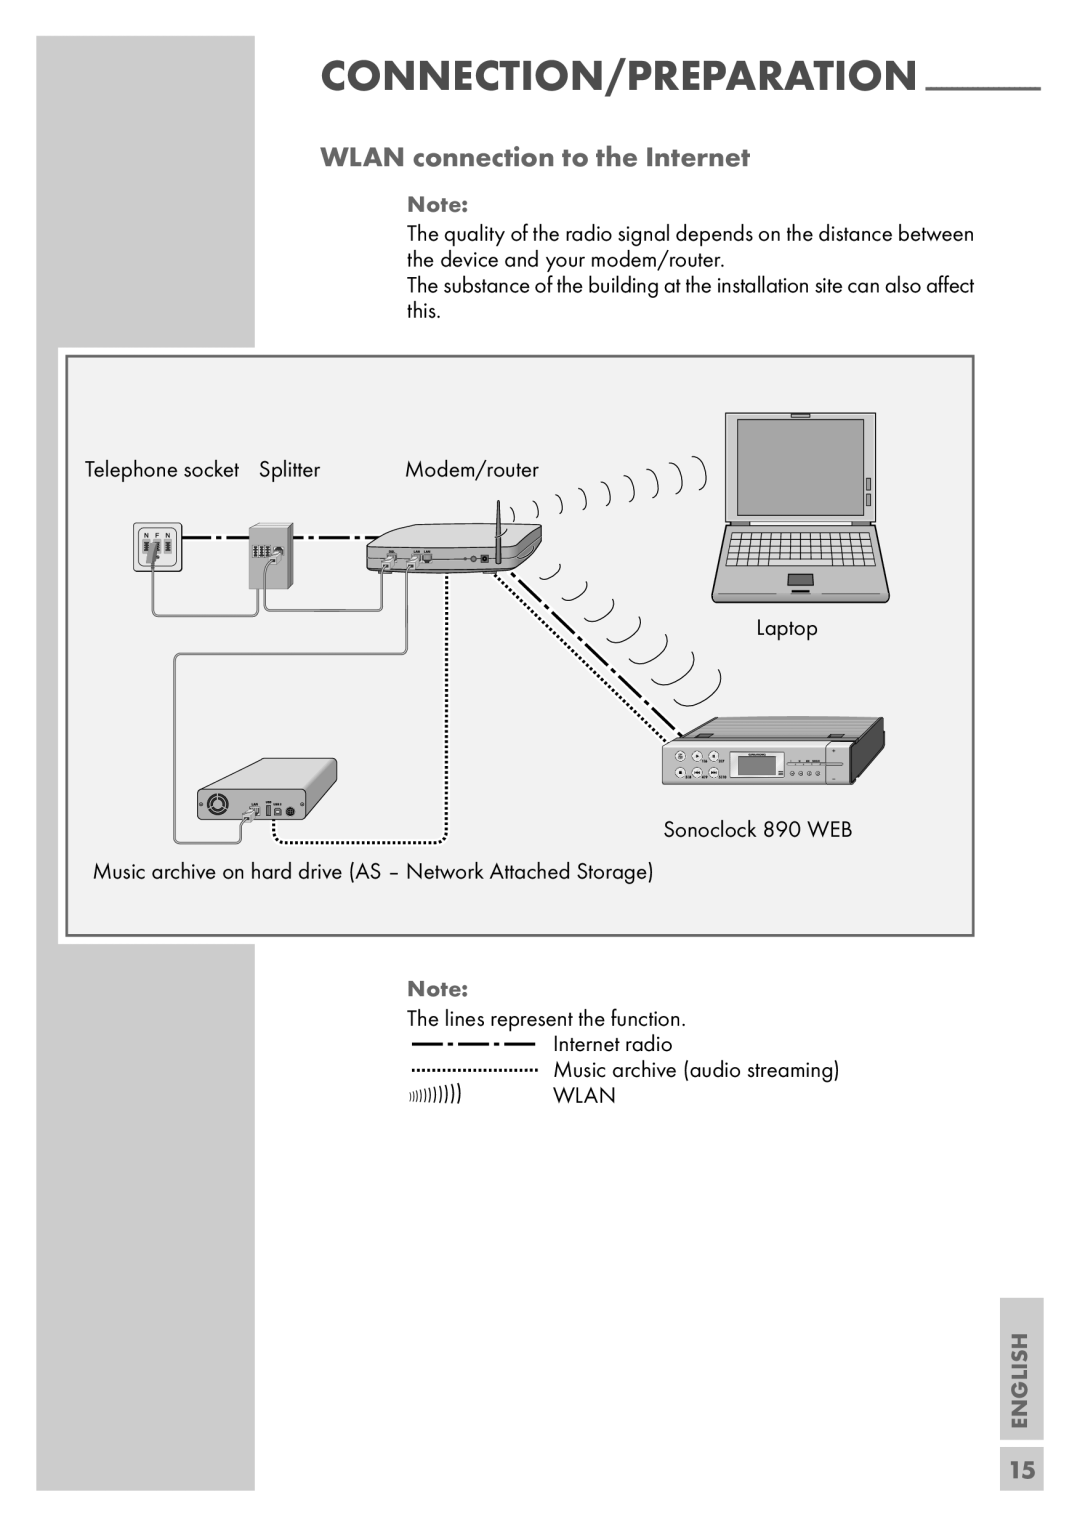 Grundig Sonoclock 890 WEB manual Connection/Preparation, WLAN connection to the Internet, English 